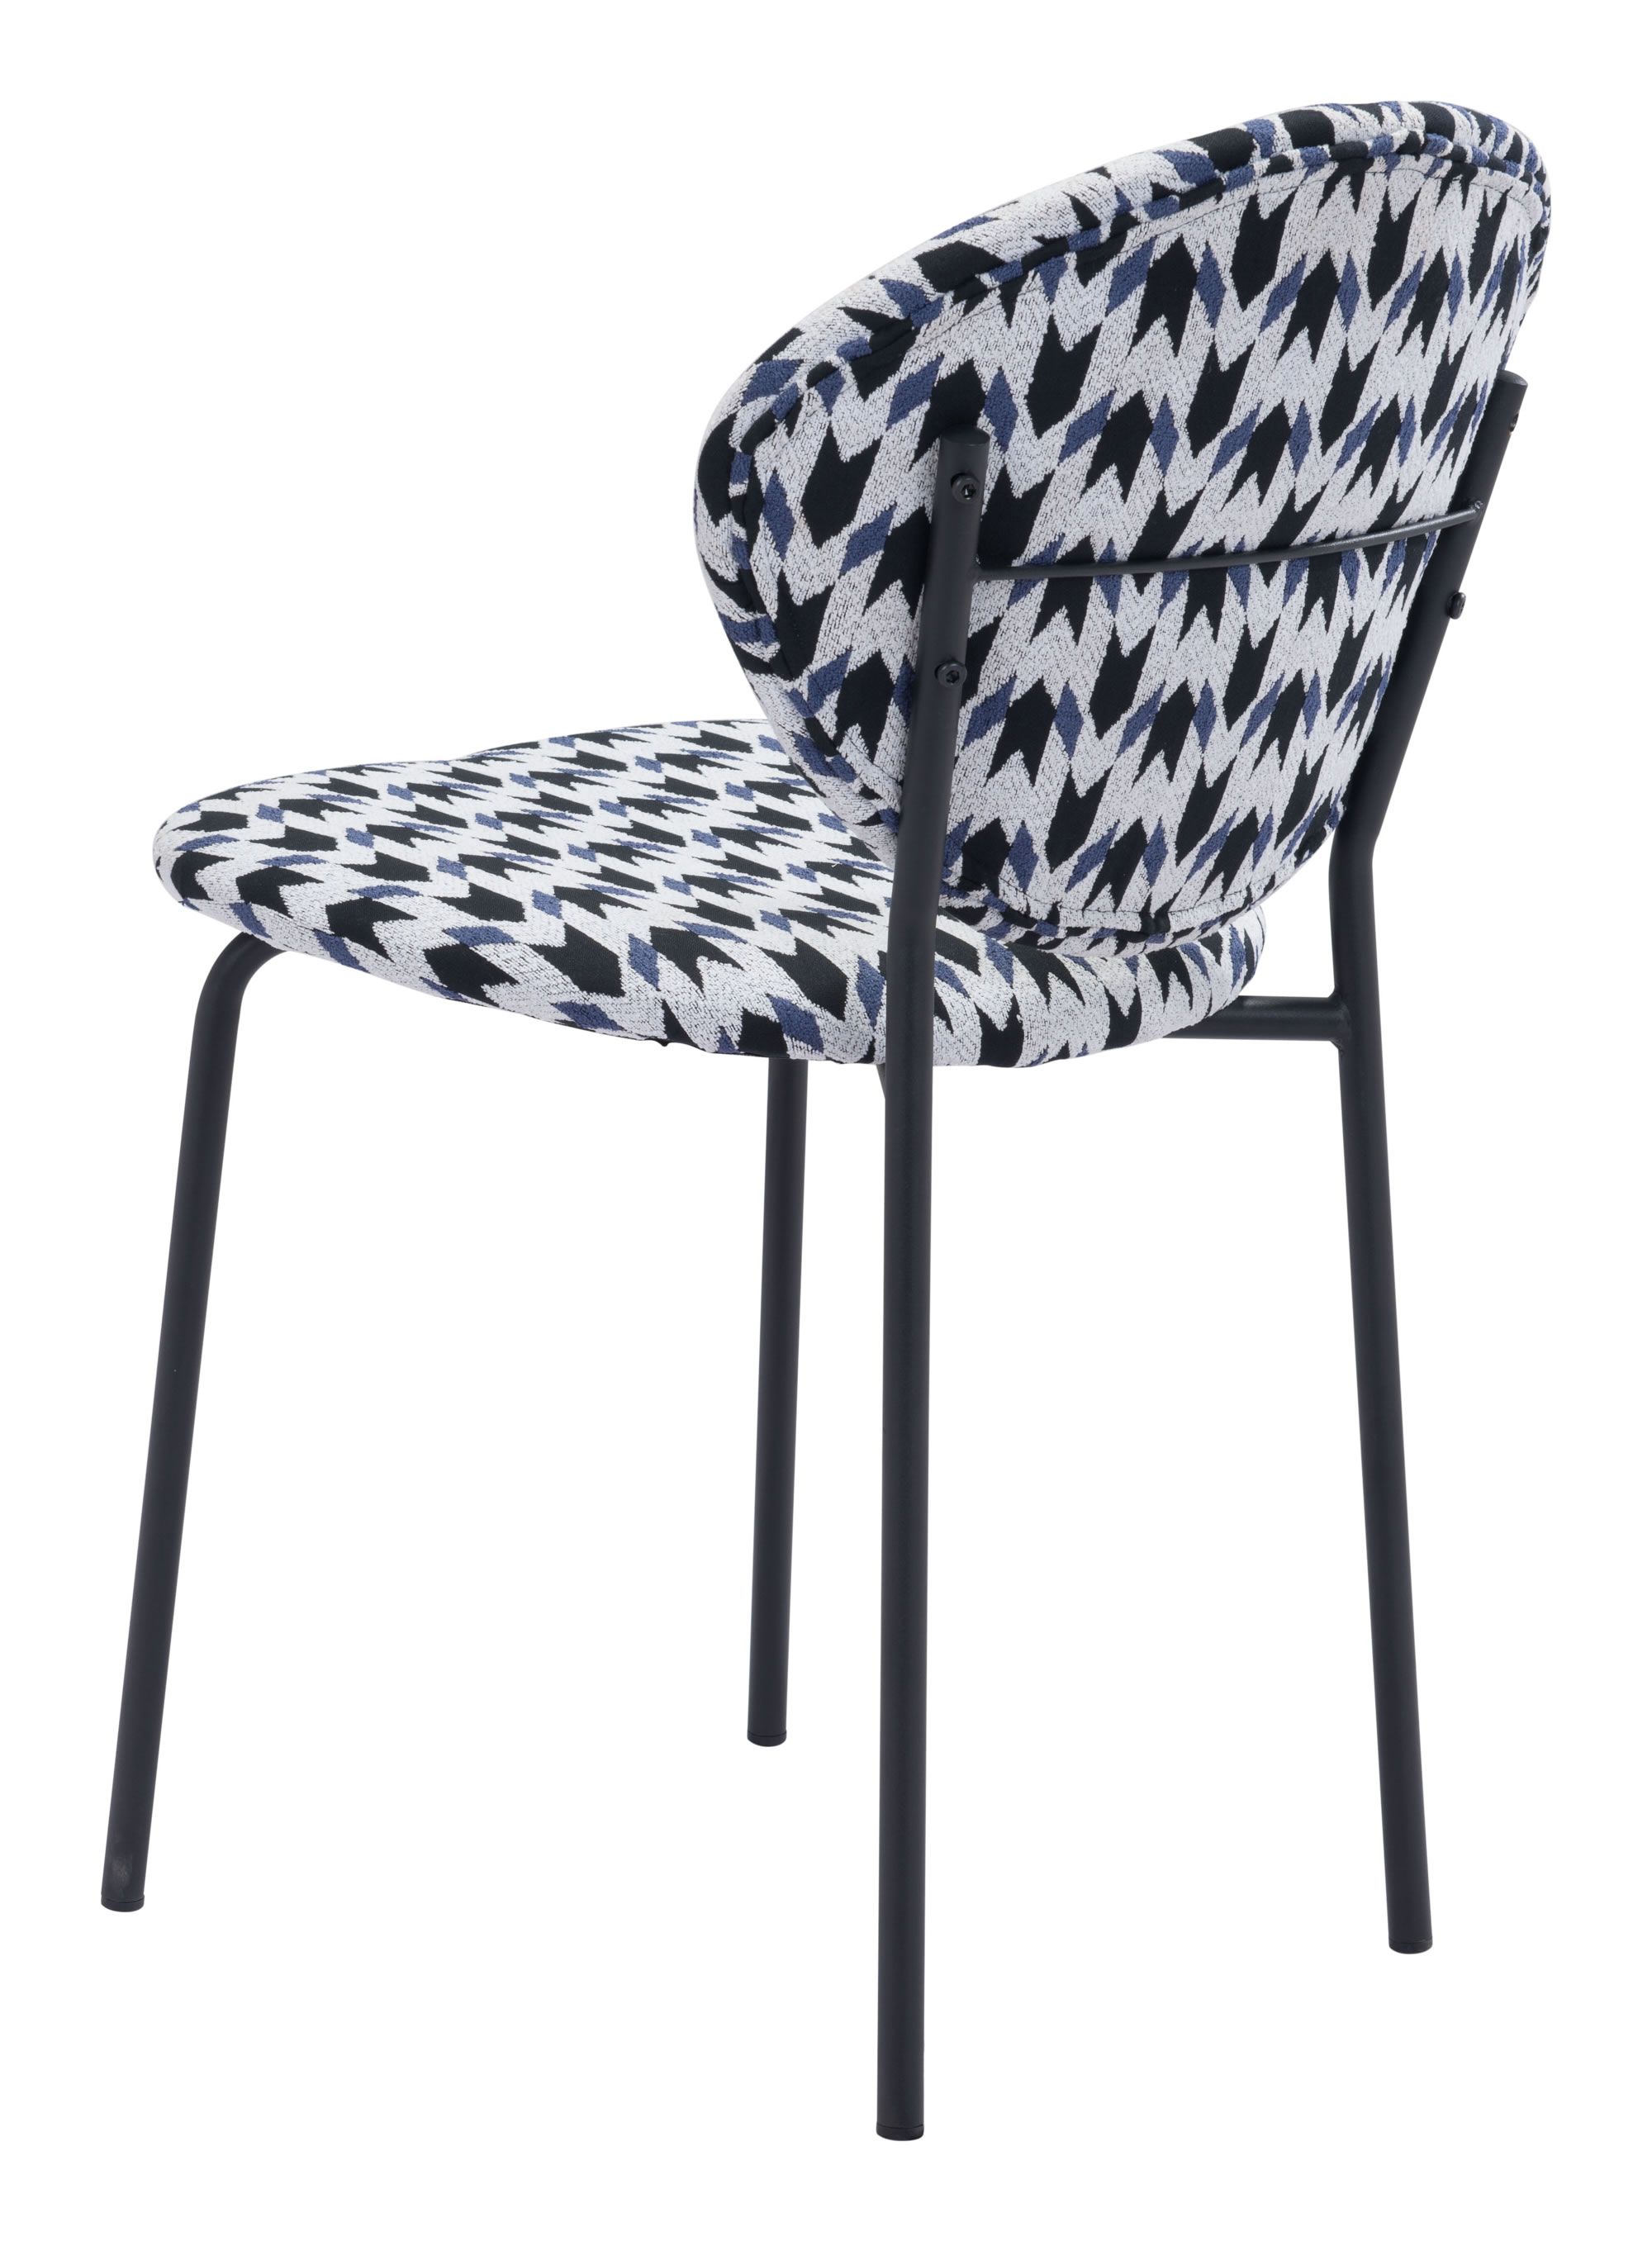 18.1" x 23.6" x 32.3" Multicolor, Black, Steel & Plywood, Chair - Set of 2